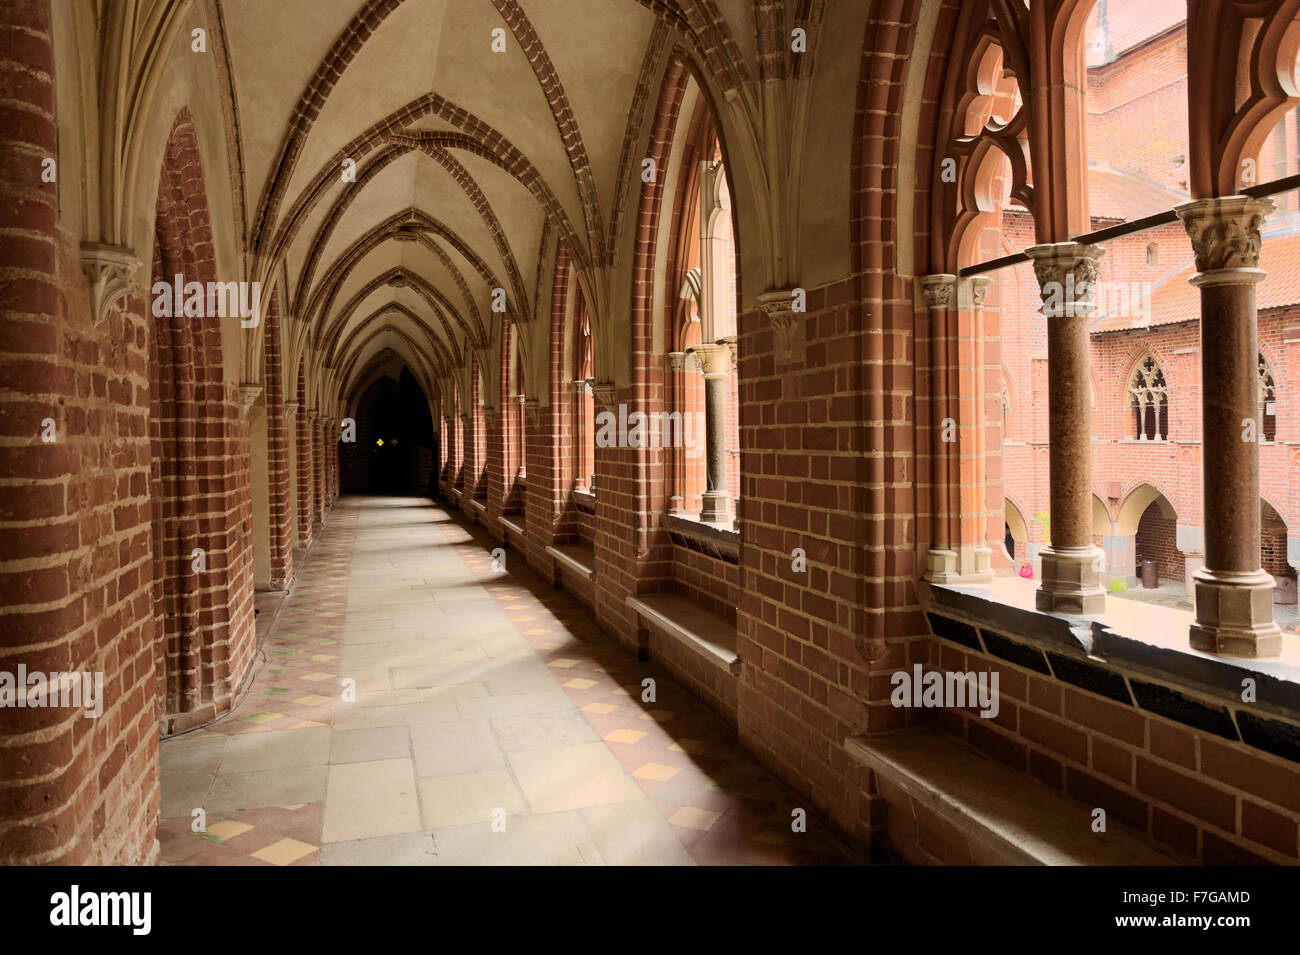 Cloister in the medieval Castle of the Teutonic Order in Malbork (Marienburg), Poland. Stock Photo